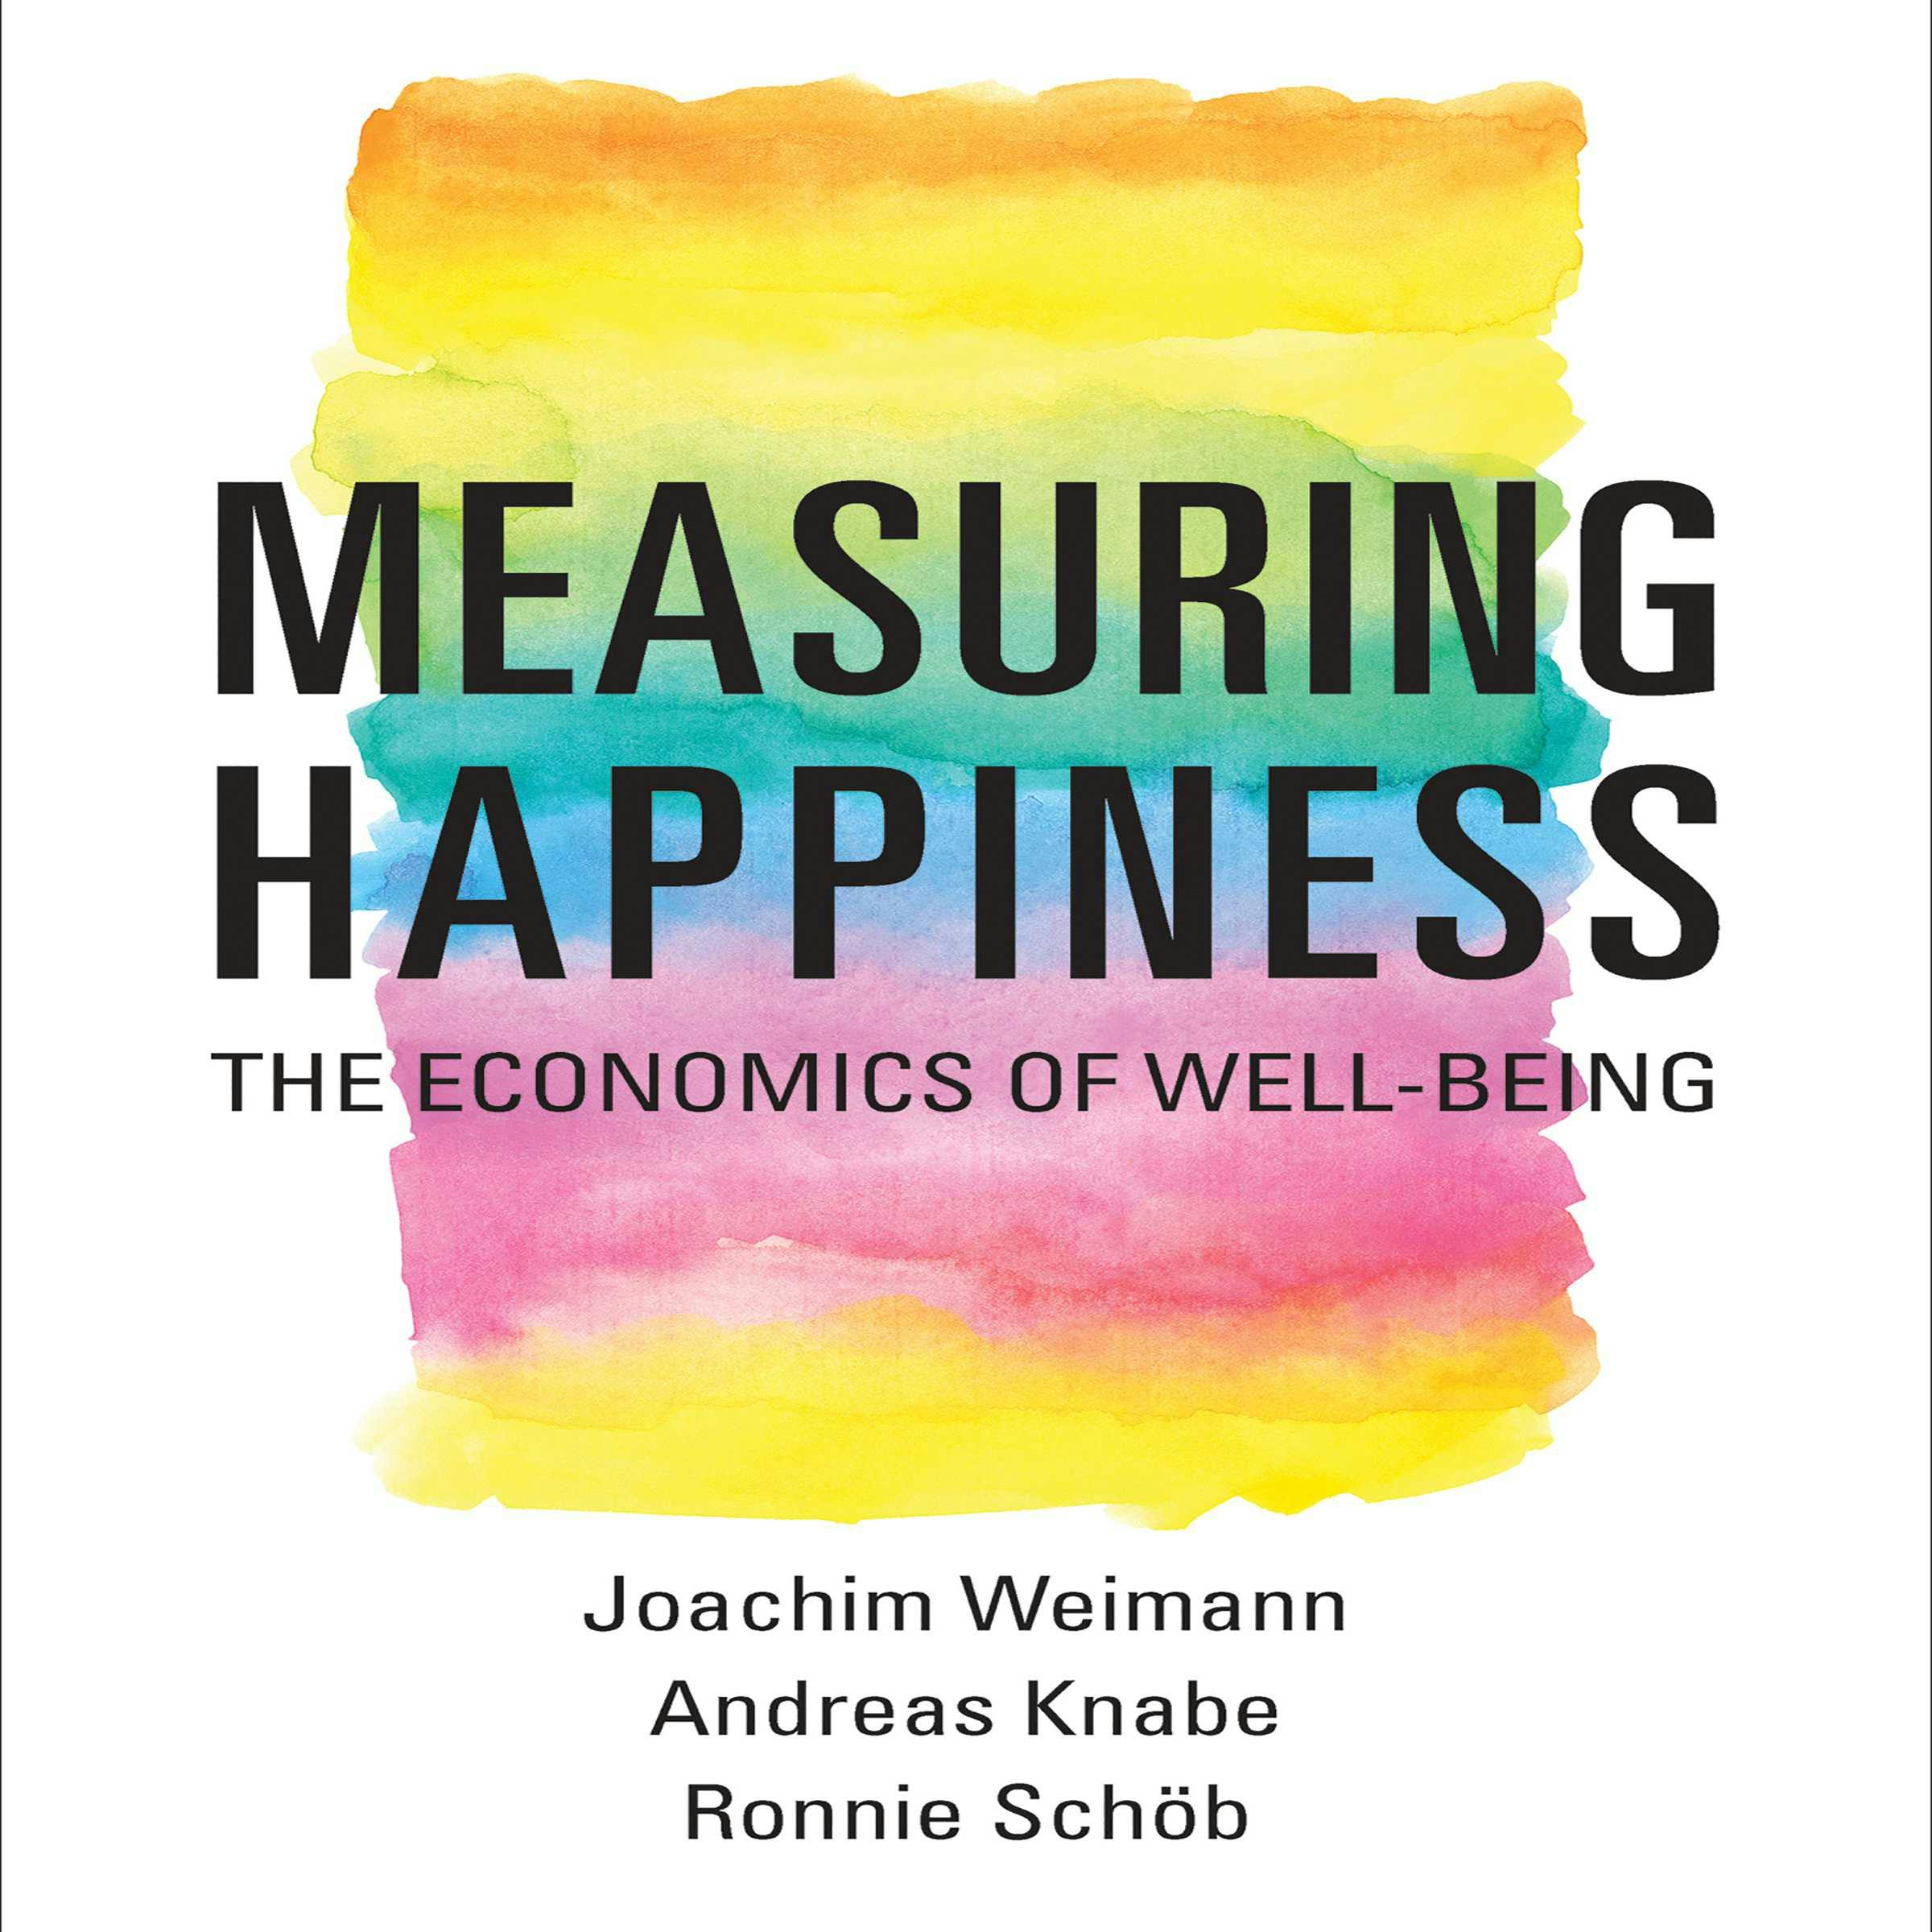 Measuring Happiness: The Economics of Well-being - Joachim Weimann, Andreas Knabe